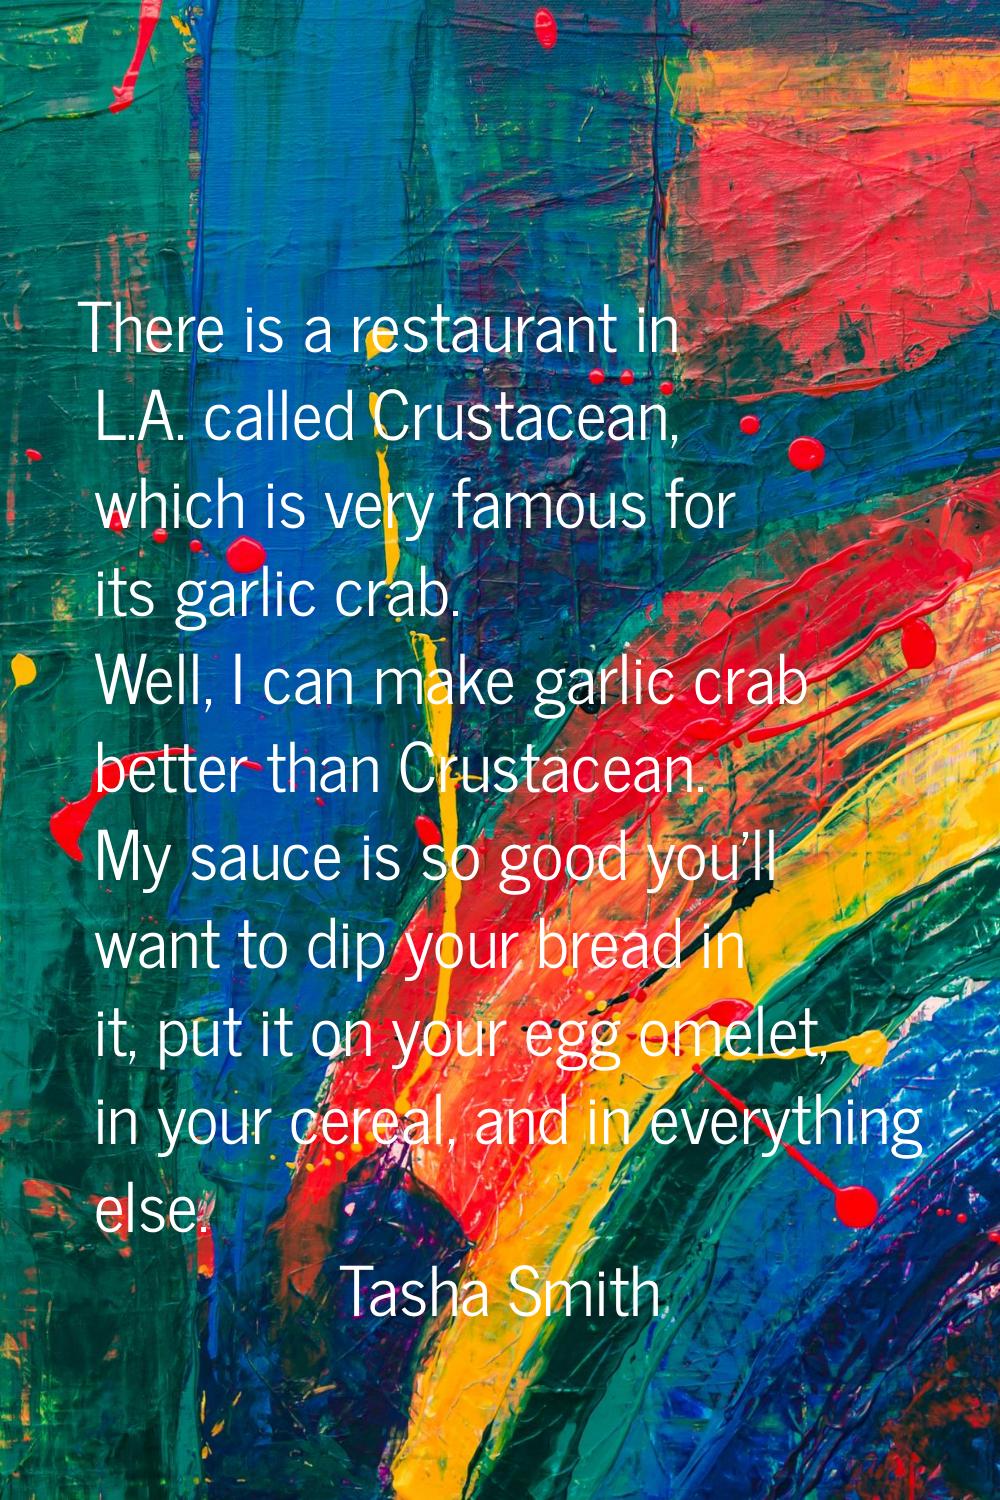 There is a restaurant in L.A. called Crustacean, which is very famous for its garlic crab. Well, I 